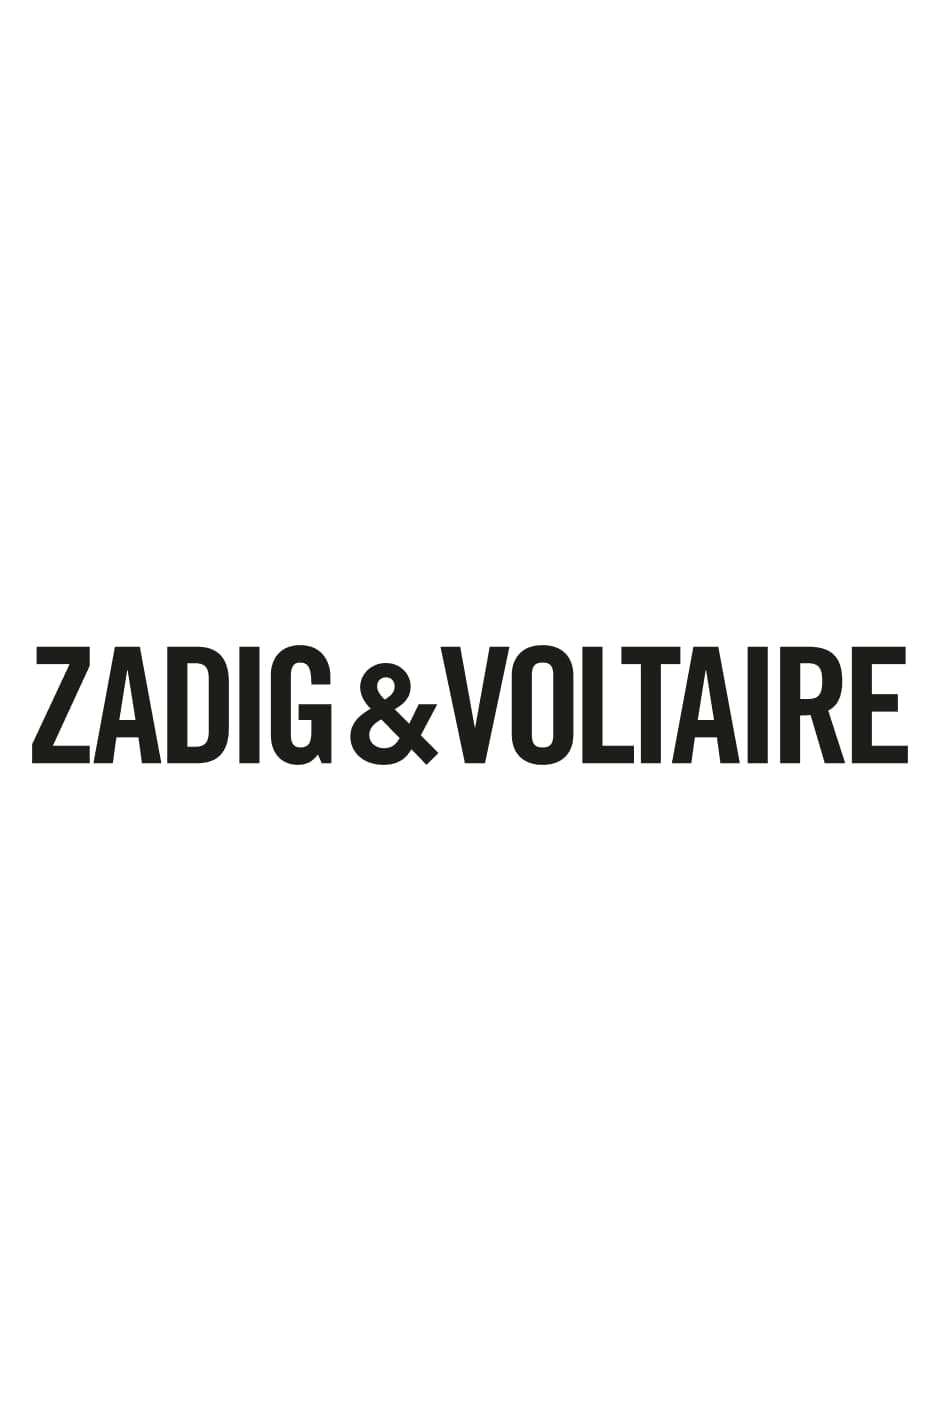 ZADIG & VOLTAIRE  LINE Official Account